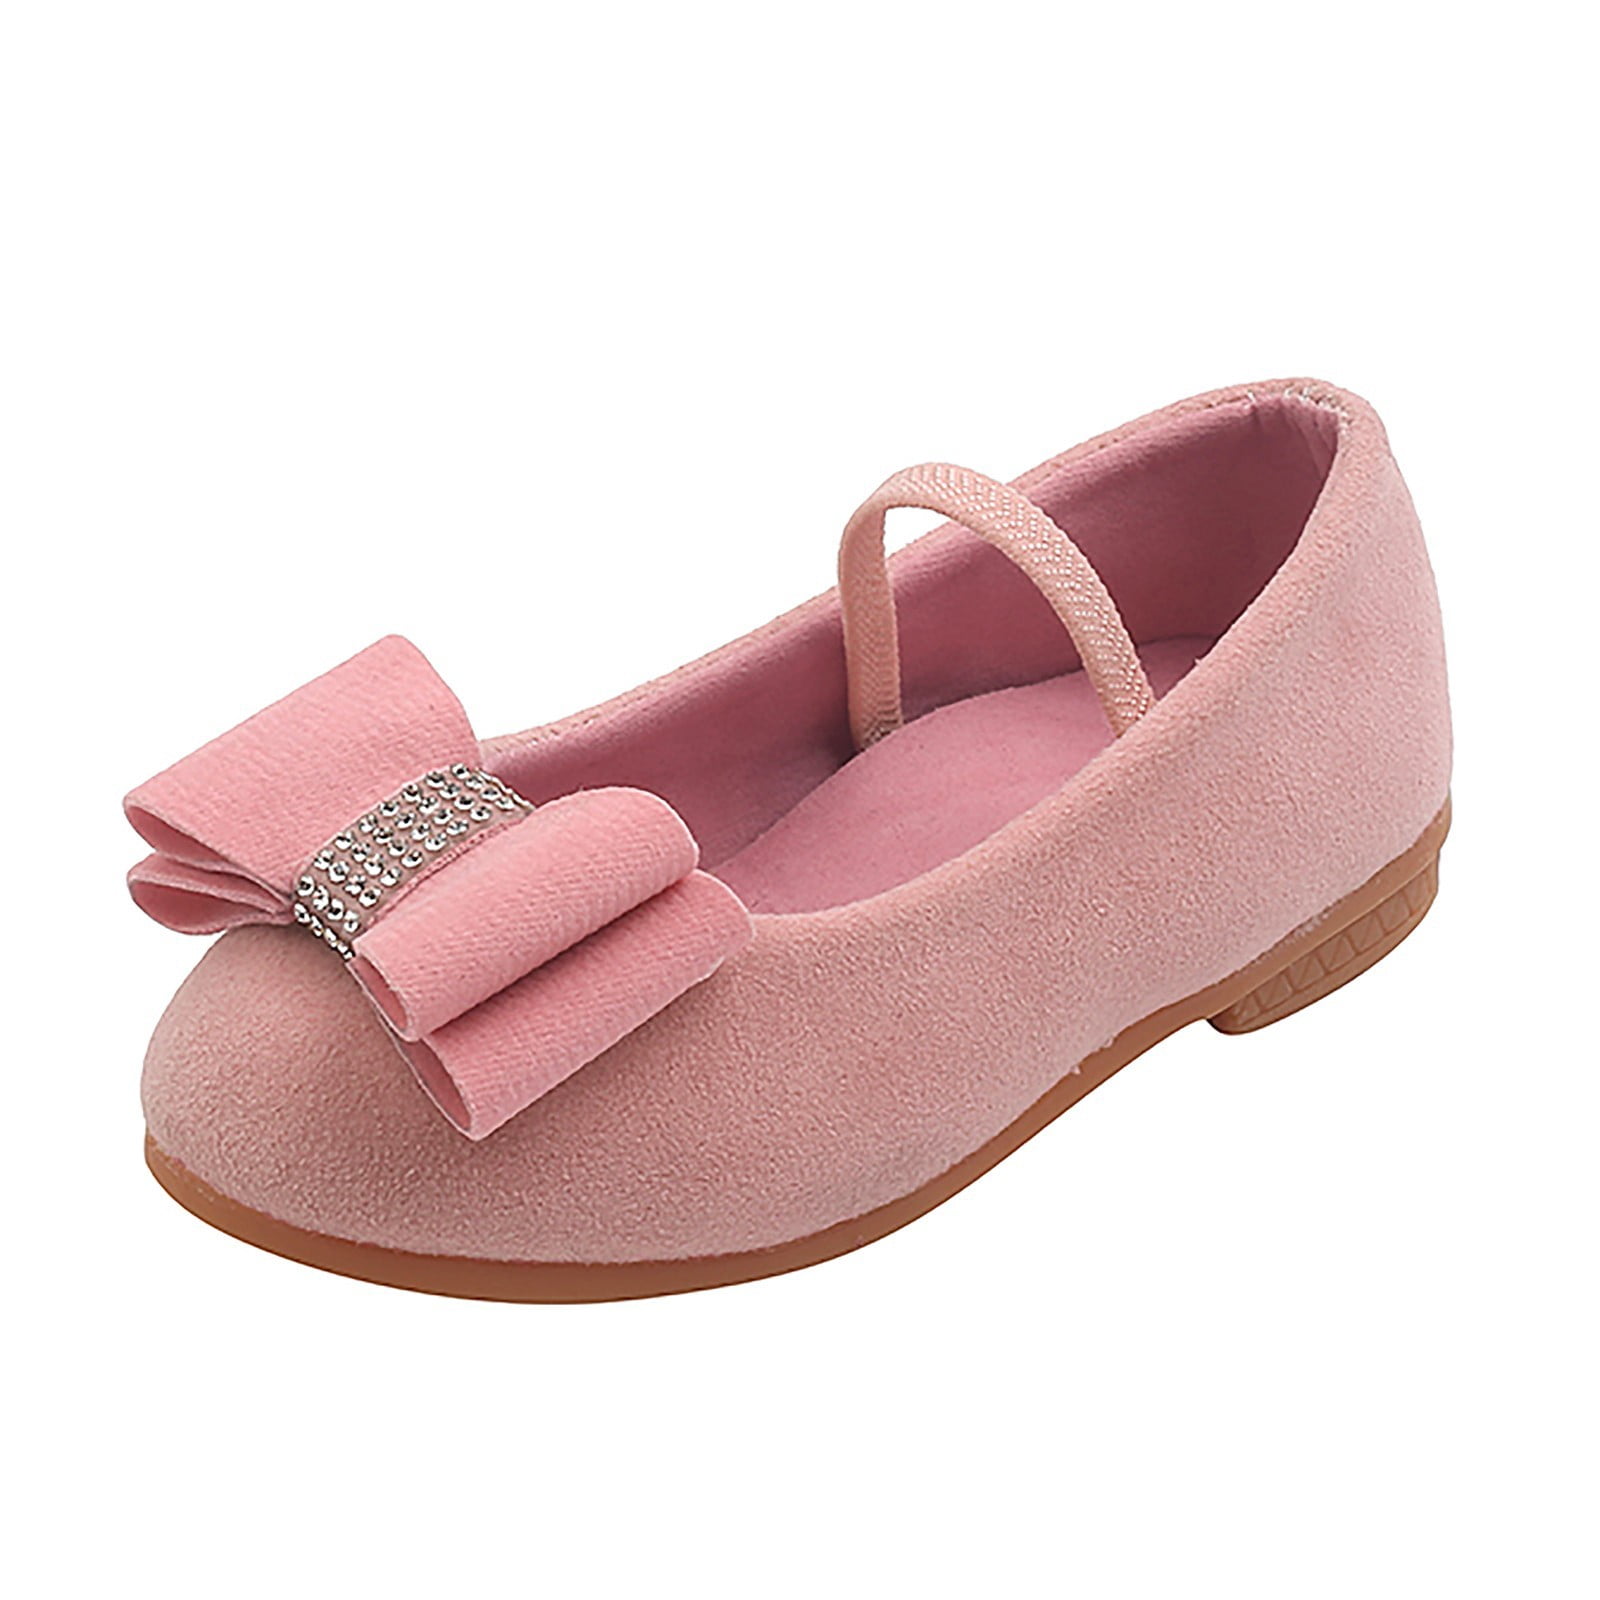 Age of Innocence round-toe leather ballerina shoes - Pink